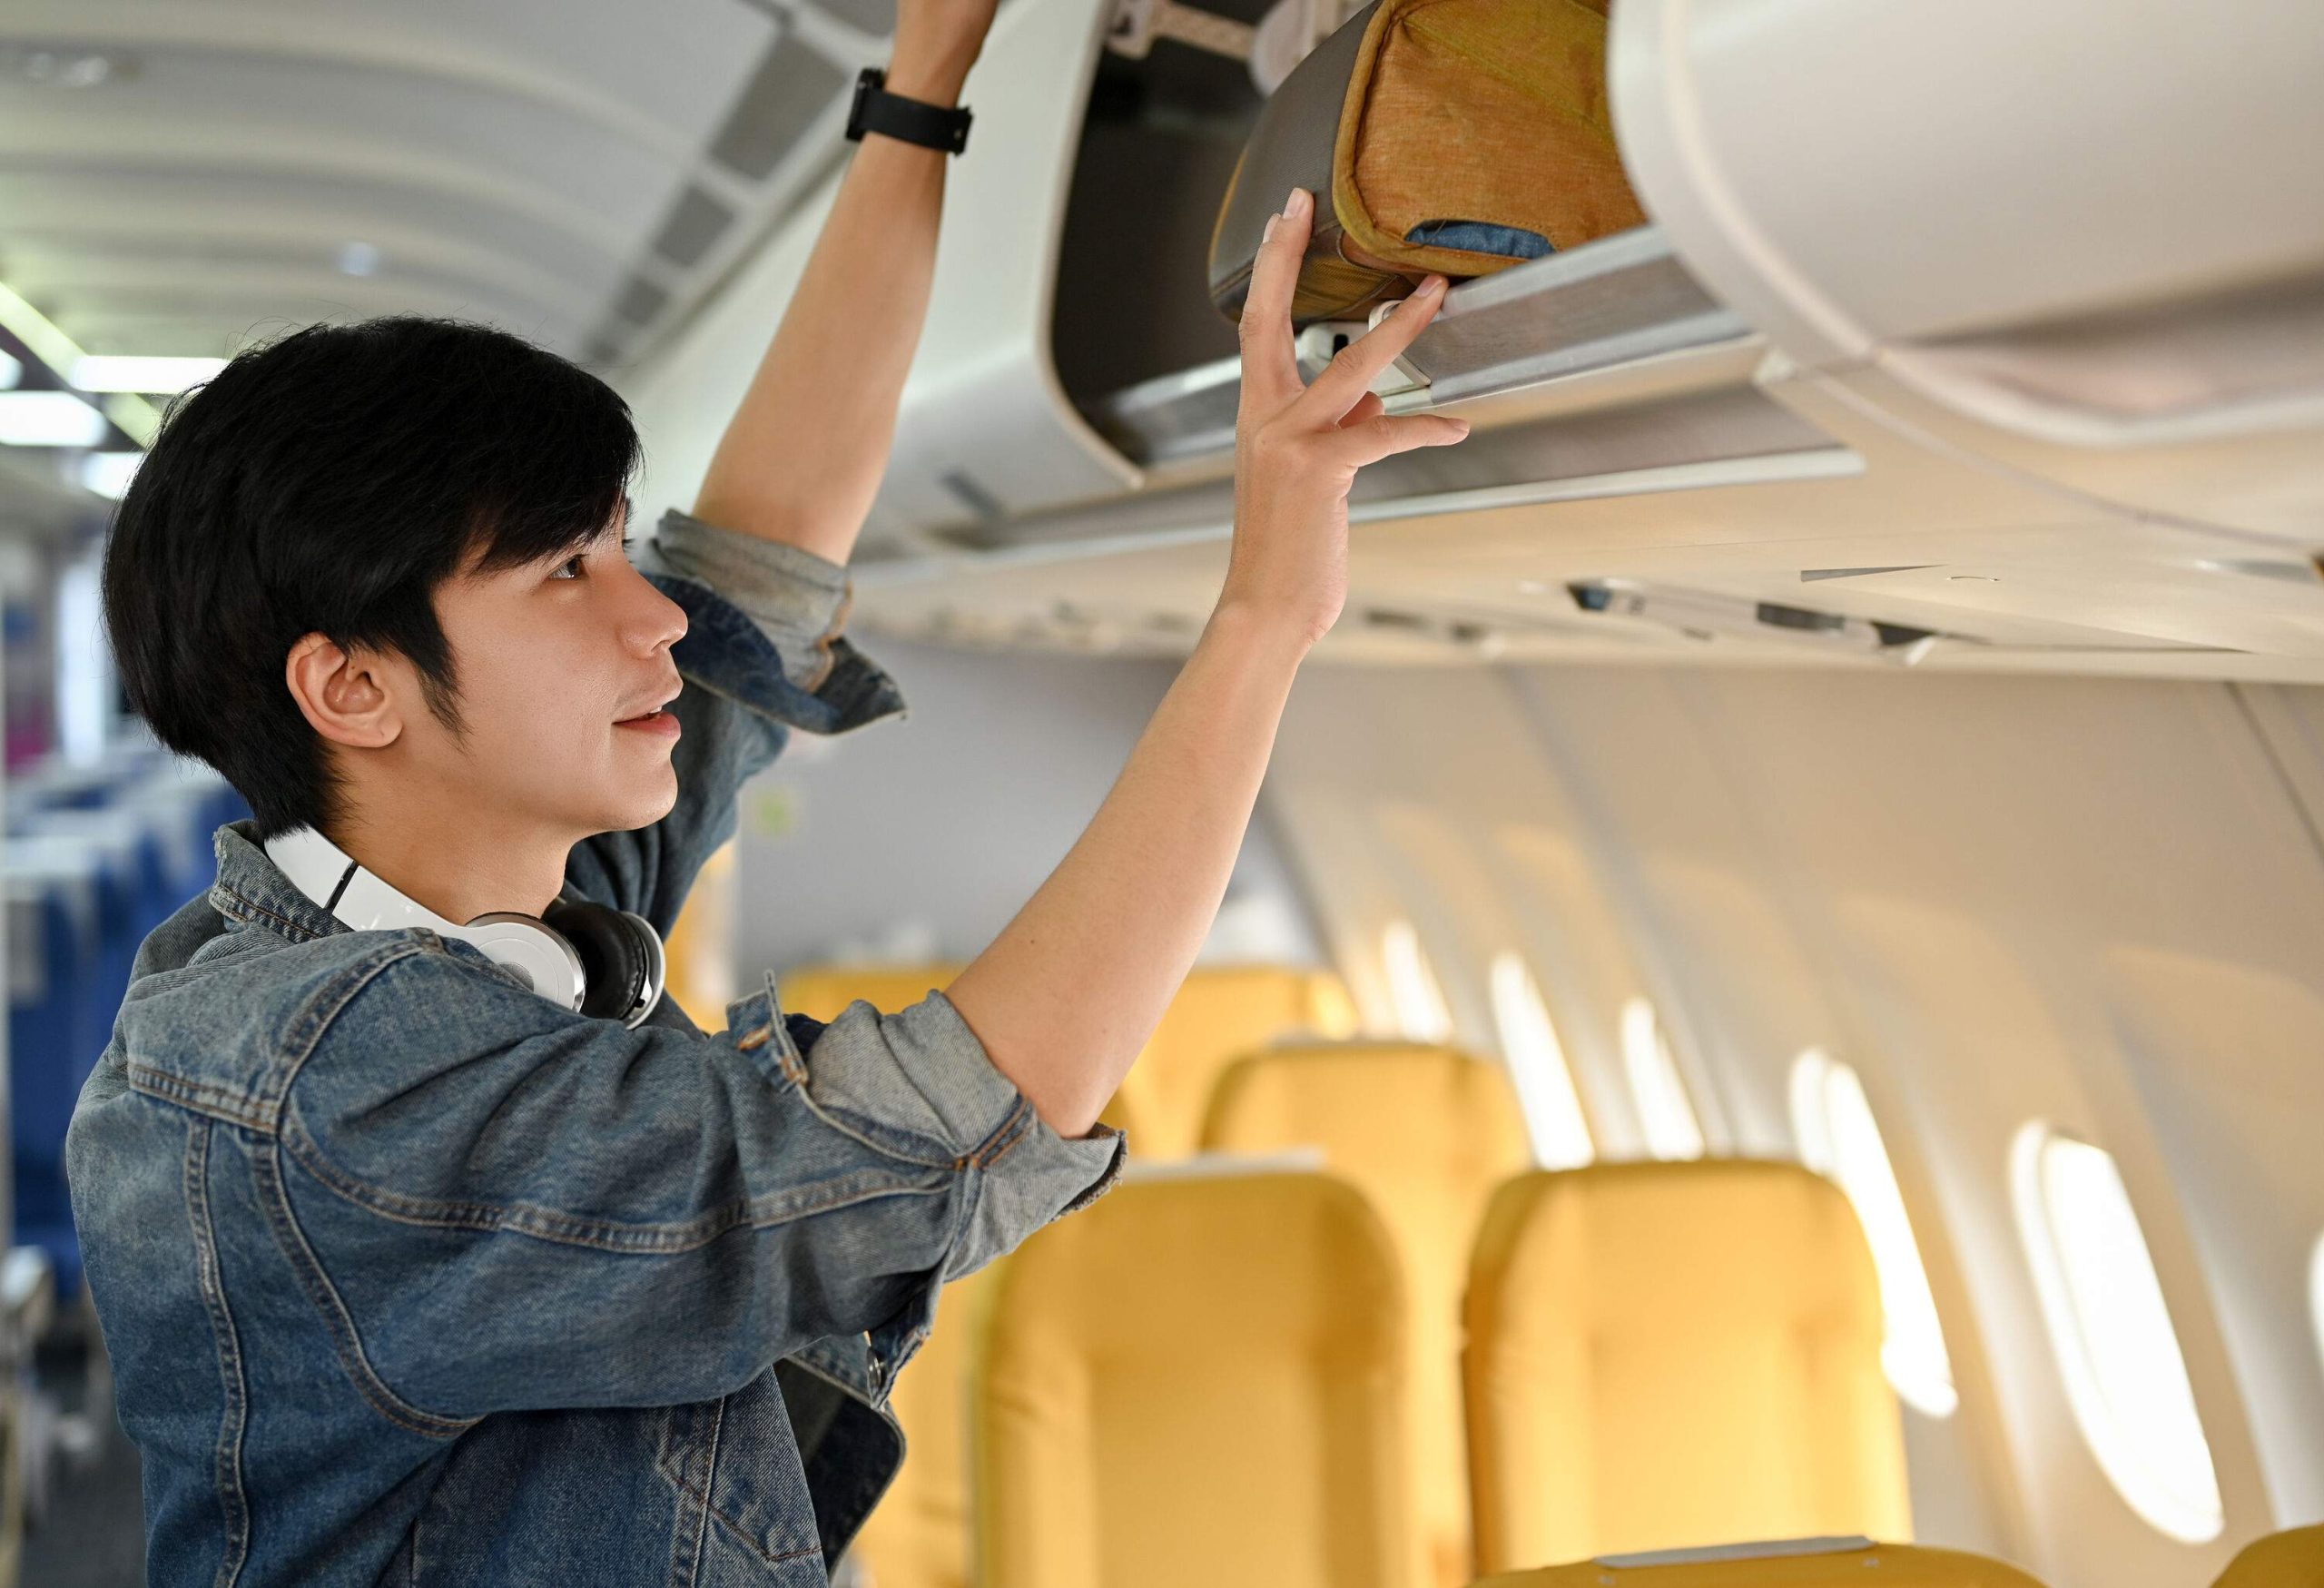 A young man stows his hand-carry luggage in the overhead compartment of an aircraft.